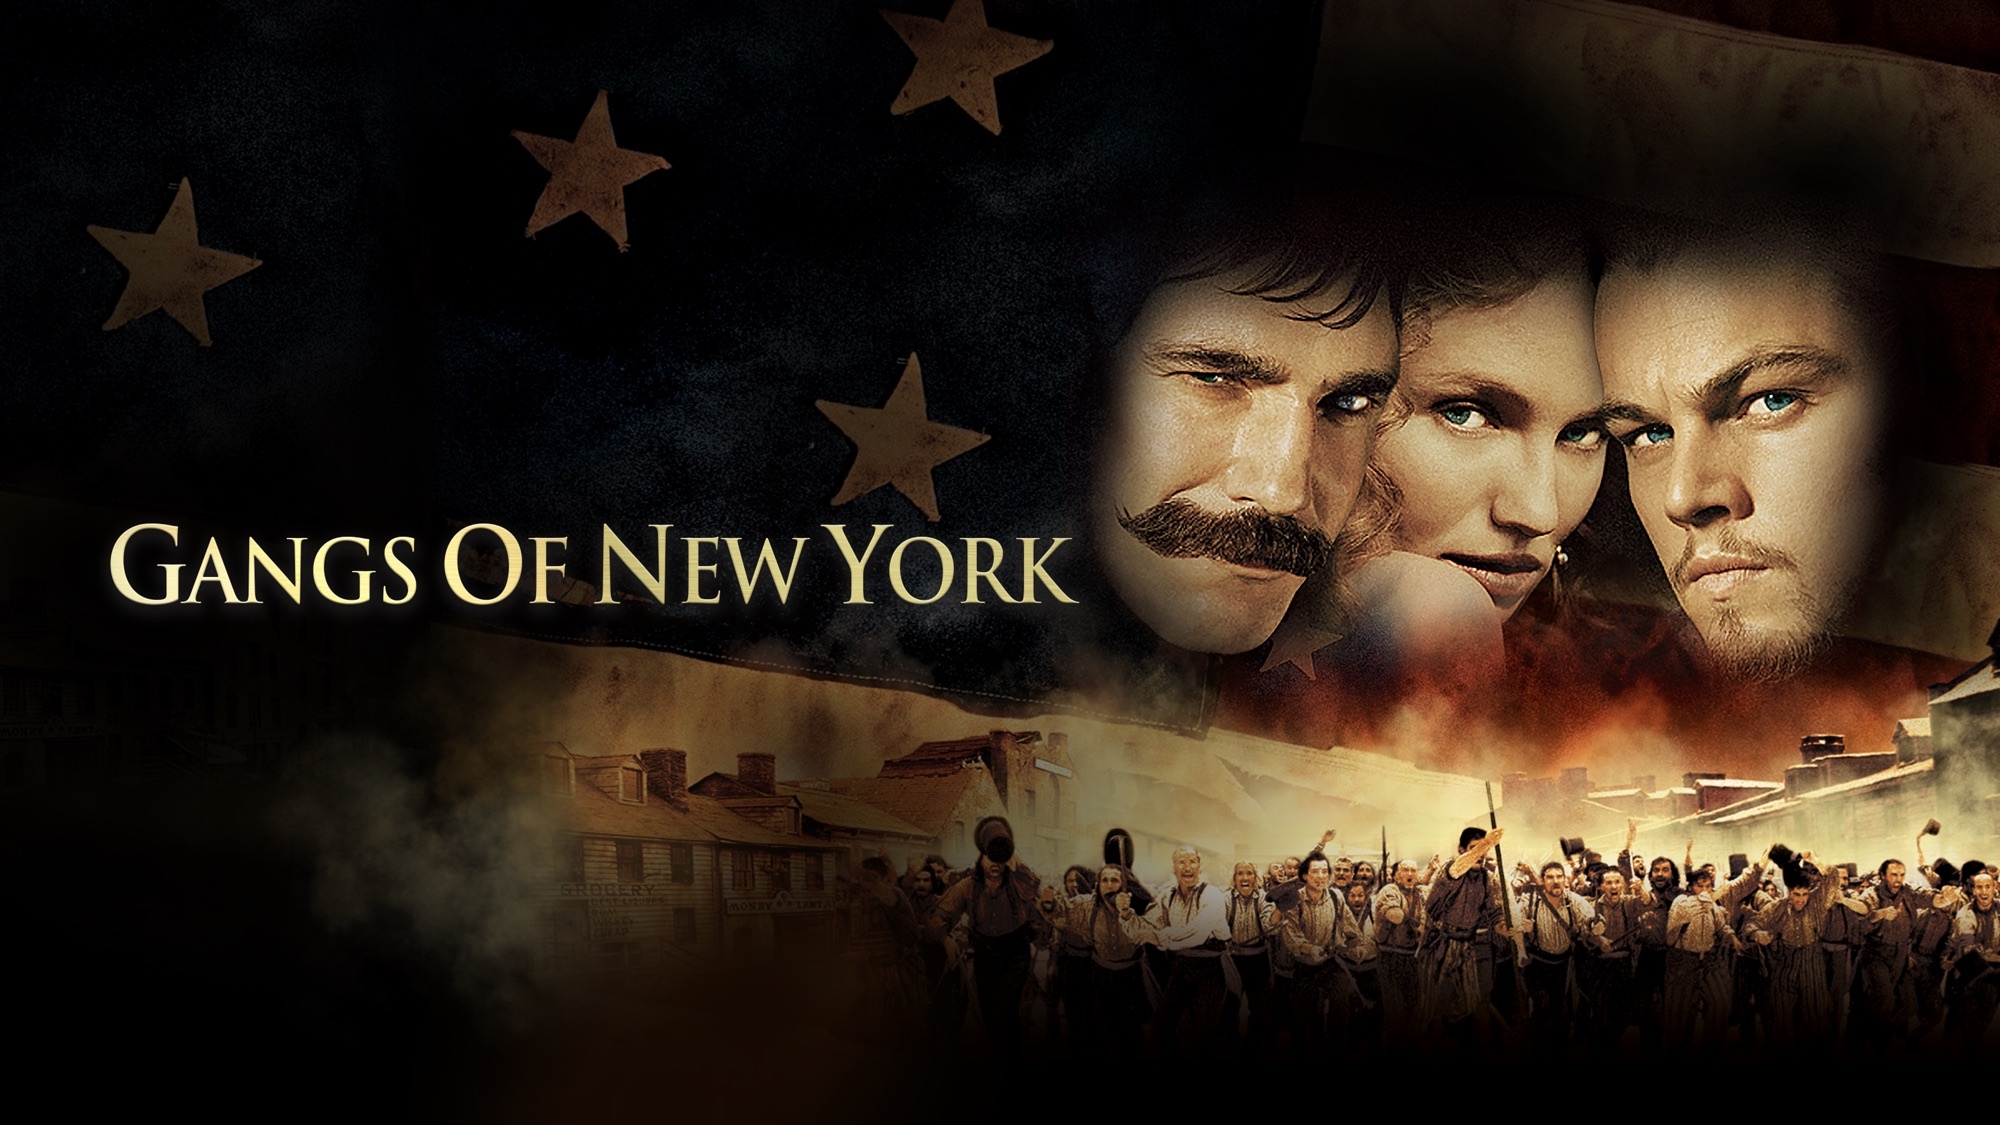 Historical drama, 19th-century New York, Immersive experience, Character-driven story, 2000x1130 HD Desktop